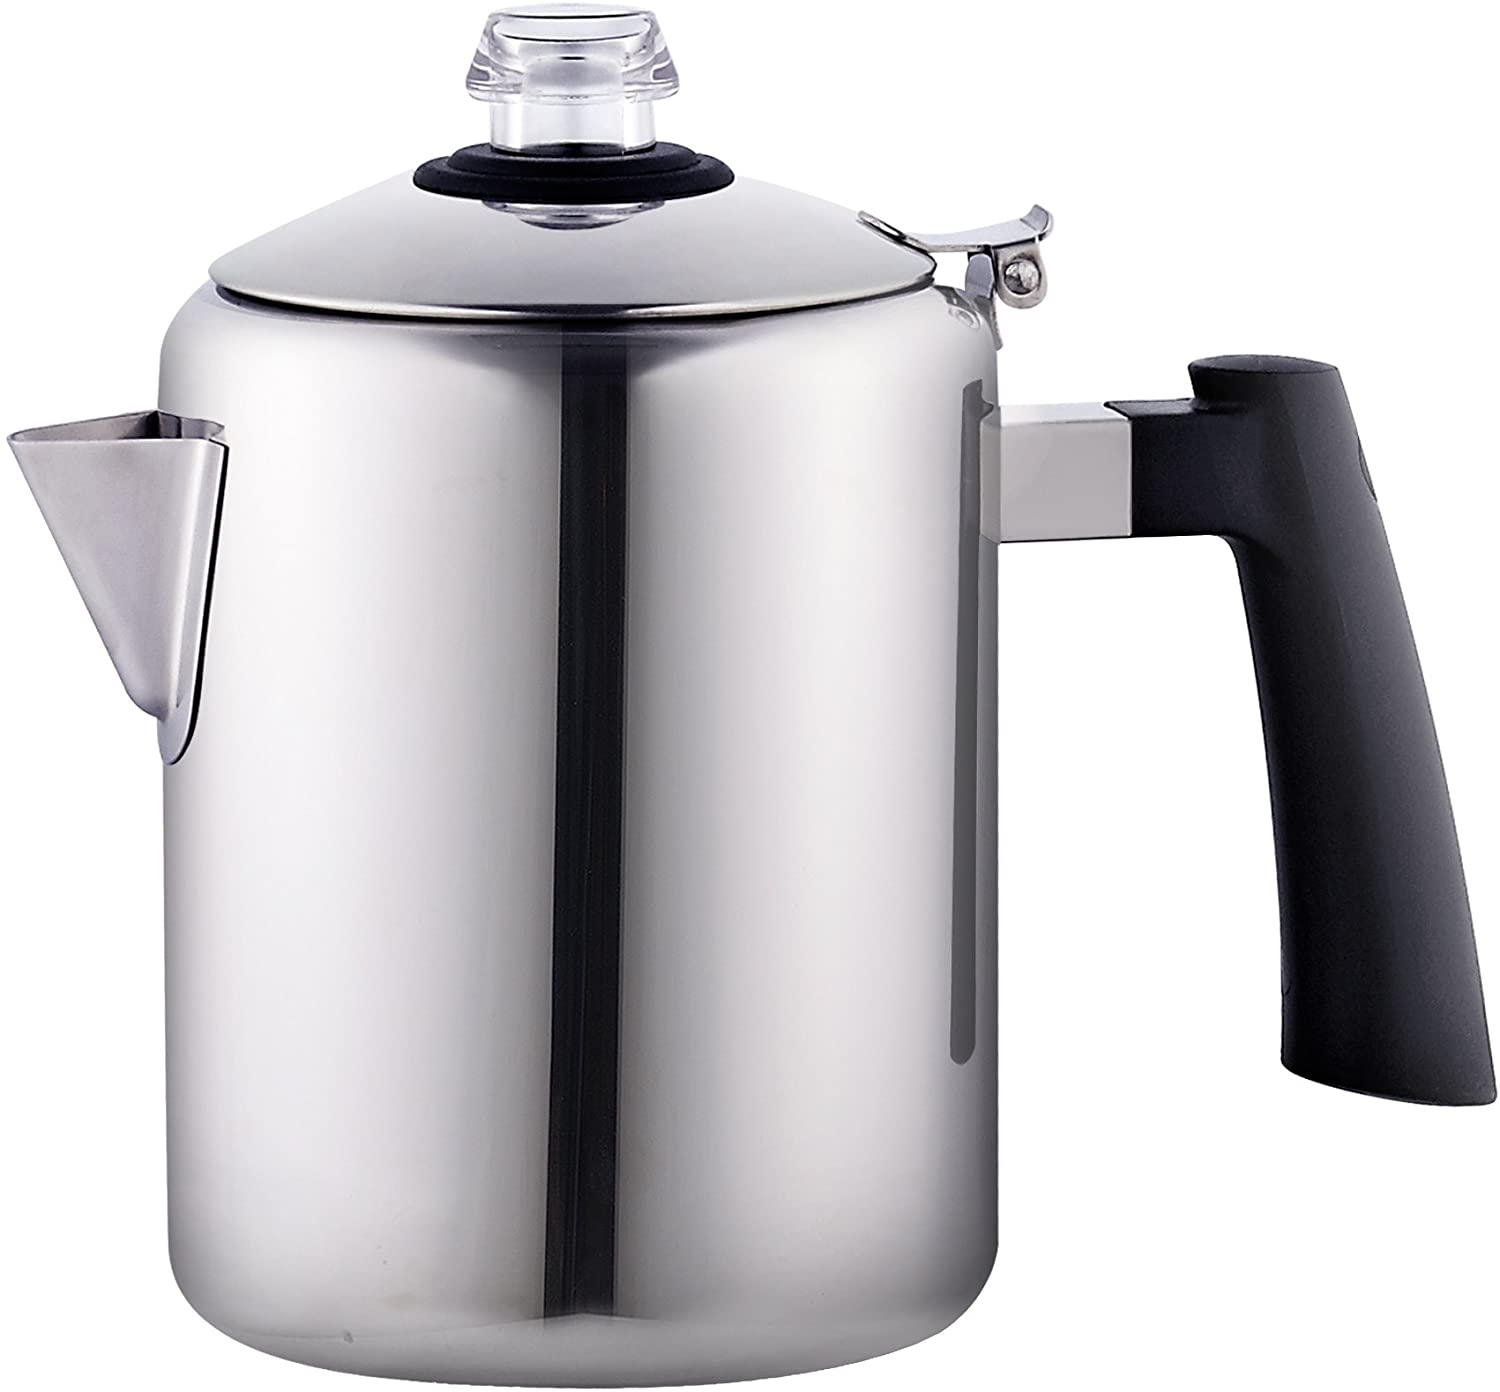 https://www.dontwasteyourmoney.com/wp-content/uploads/2020/06/cook-n-home-stainless-steel-stovetop-coffee-percolator-8-cup-coffee-percolator.jpg